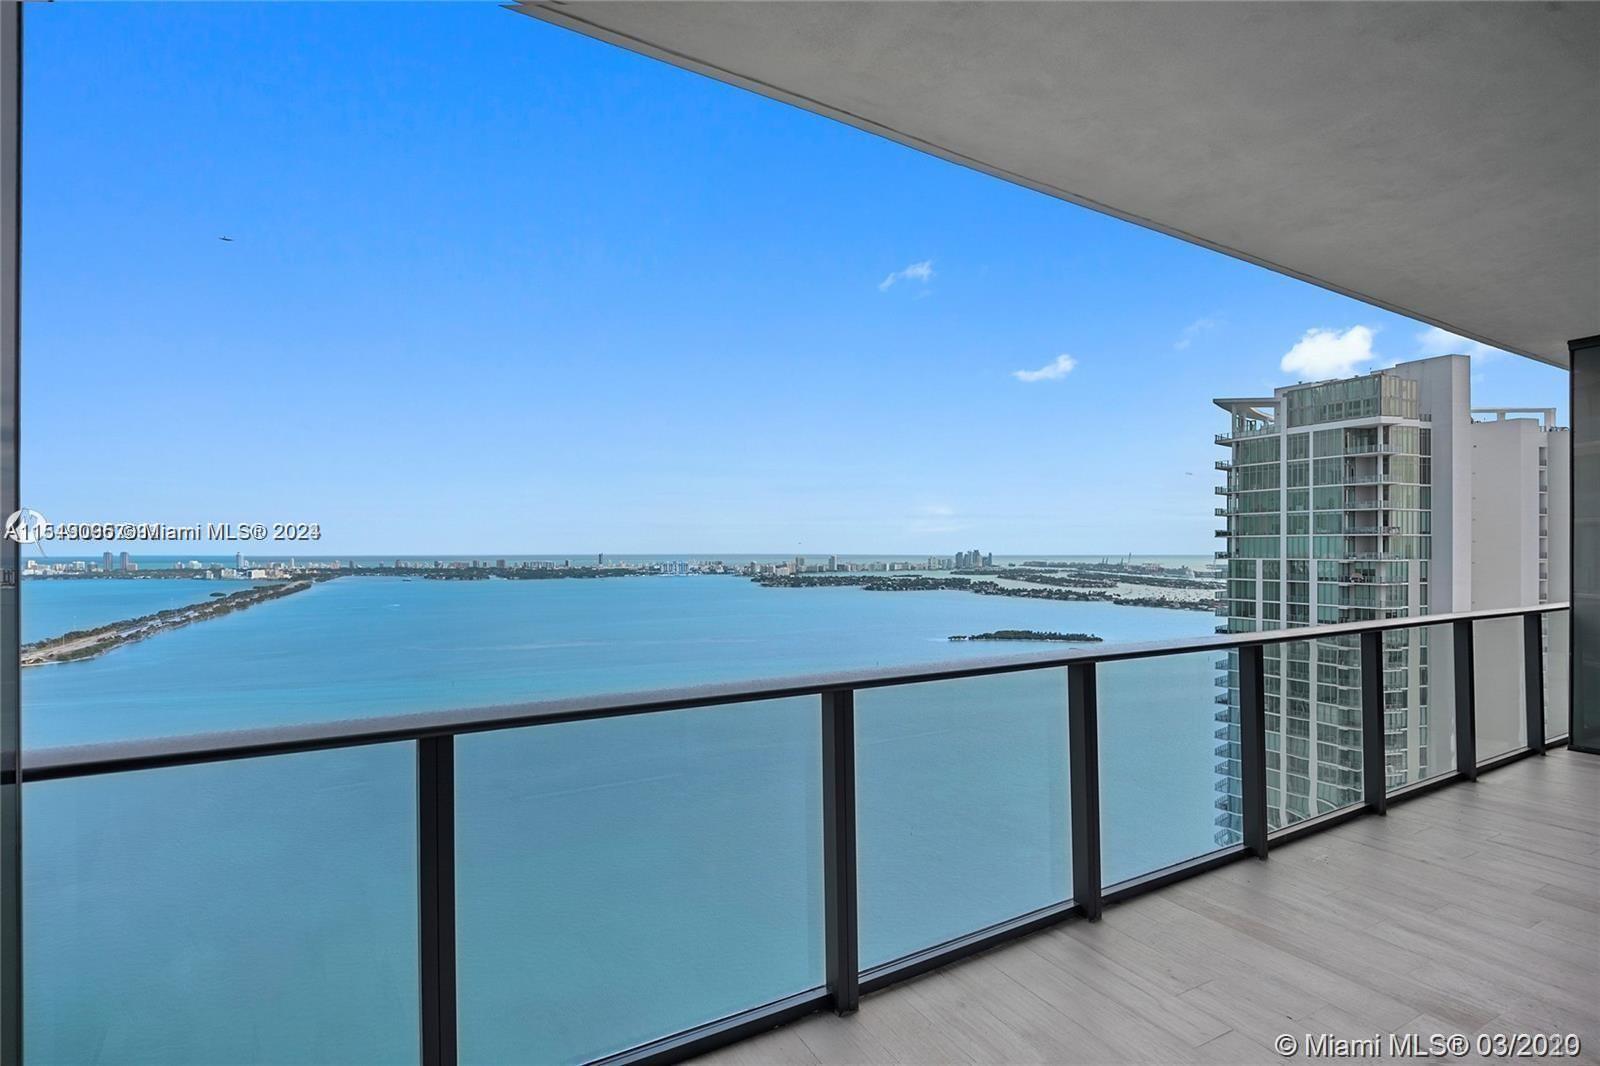 Amazing 2 Bedrooms, 3 full Bathrooms unit with breathtaking bay views. This unit offers beautiful ma